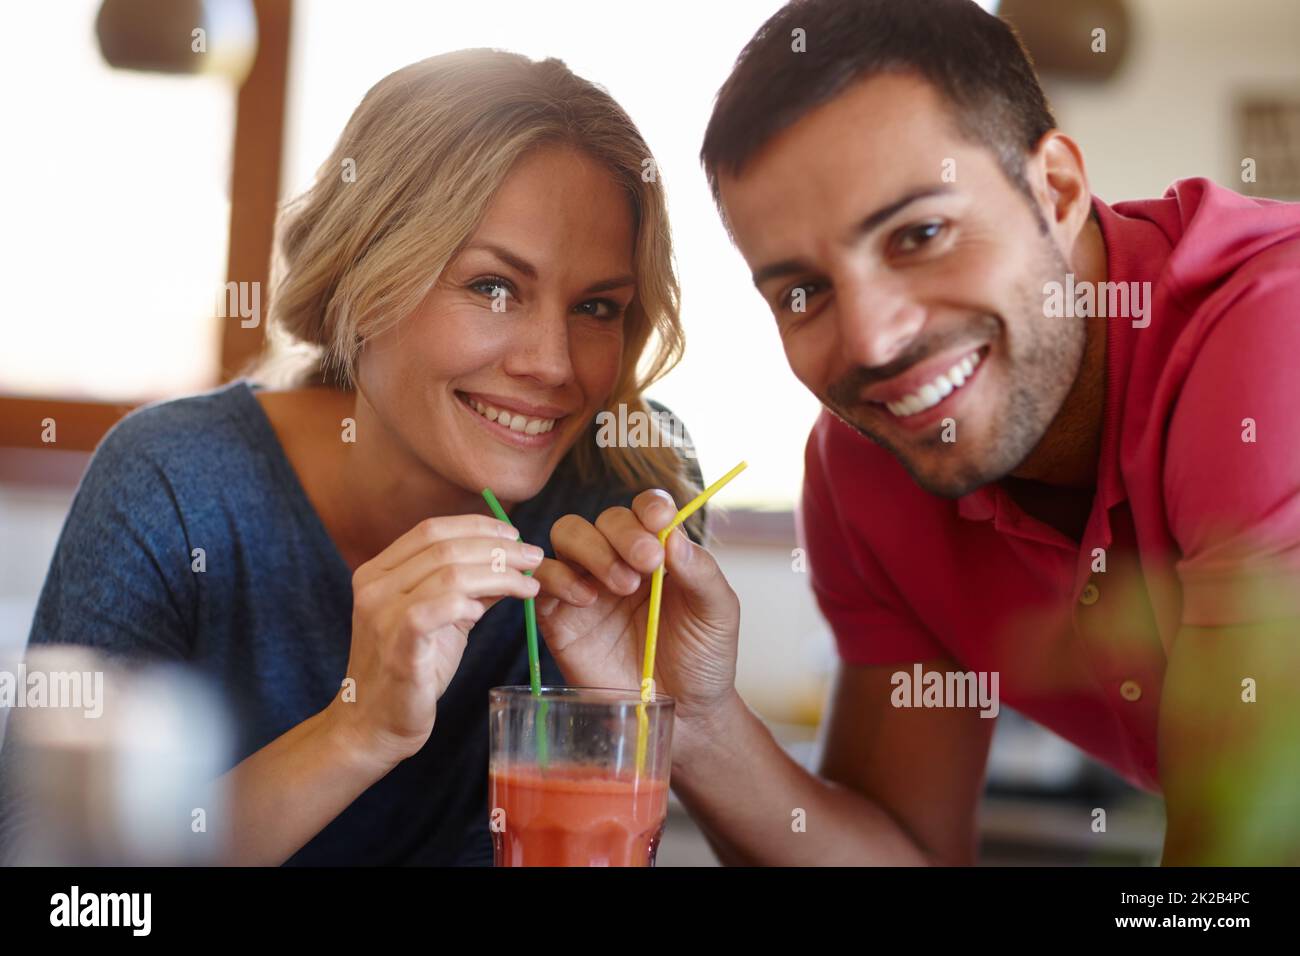 Old school romance. Shot of a happy young couple sharing a milkshake. Stock Photo